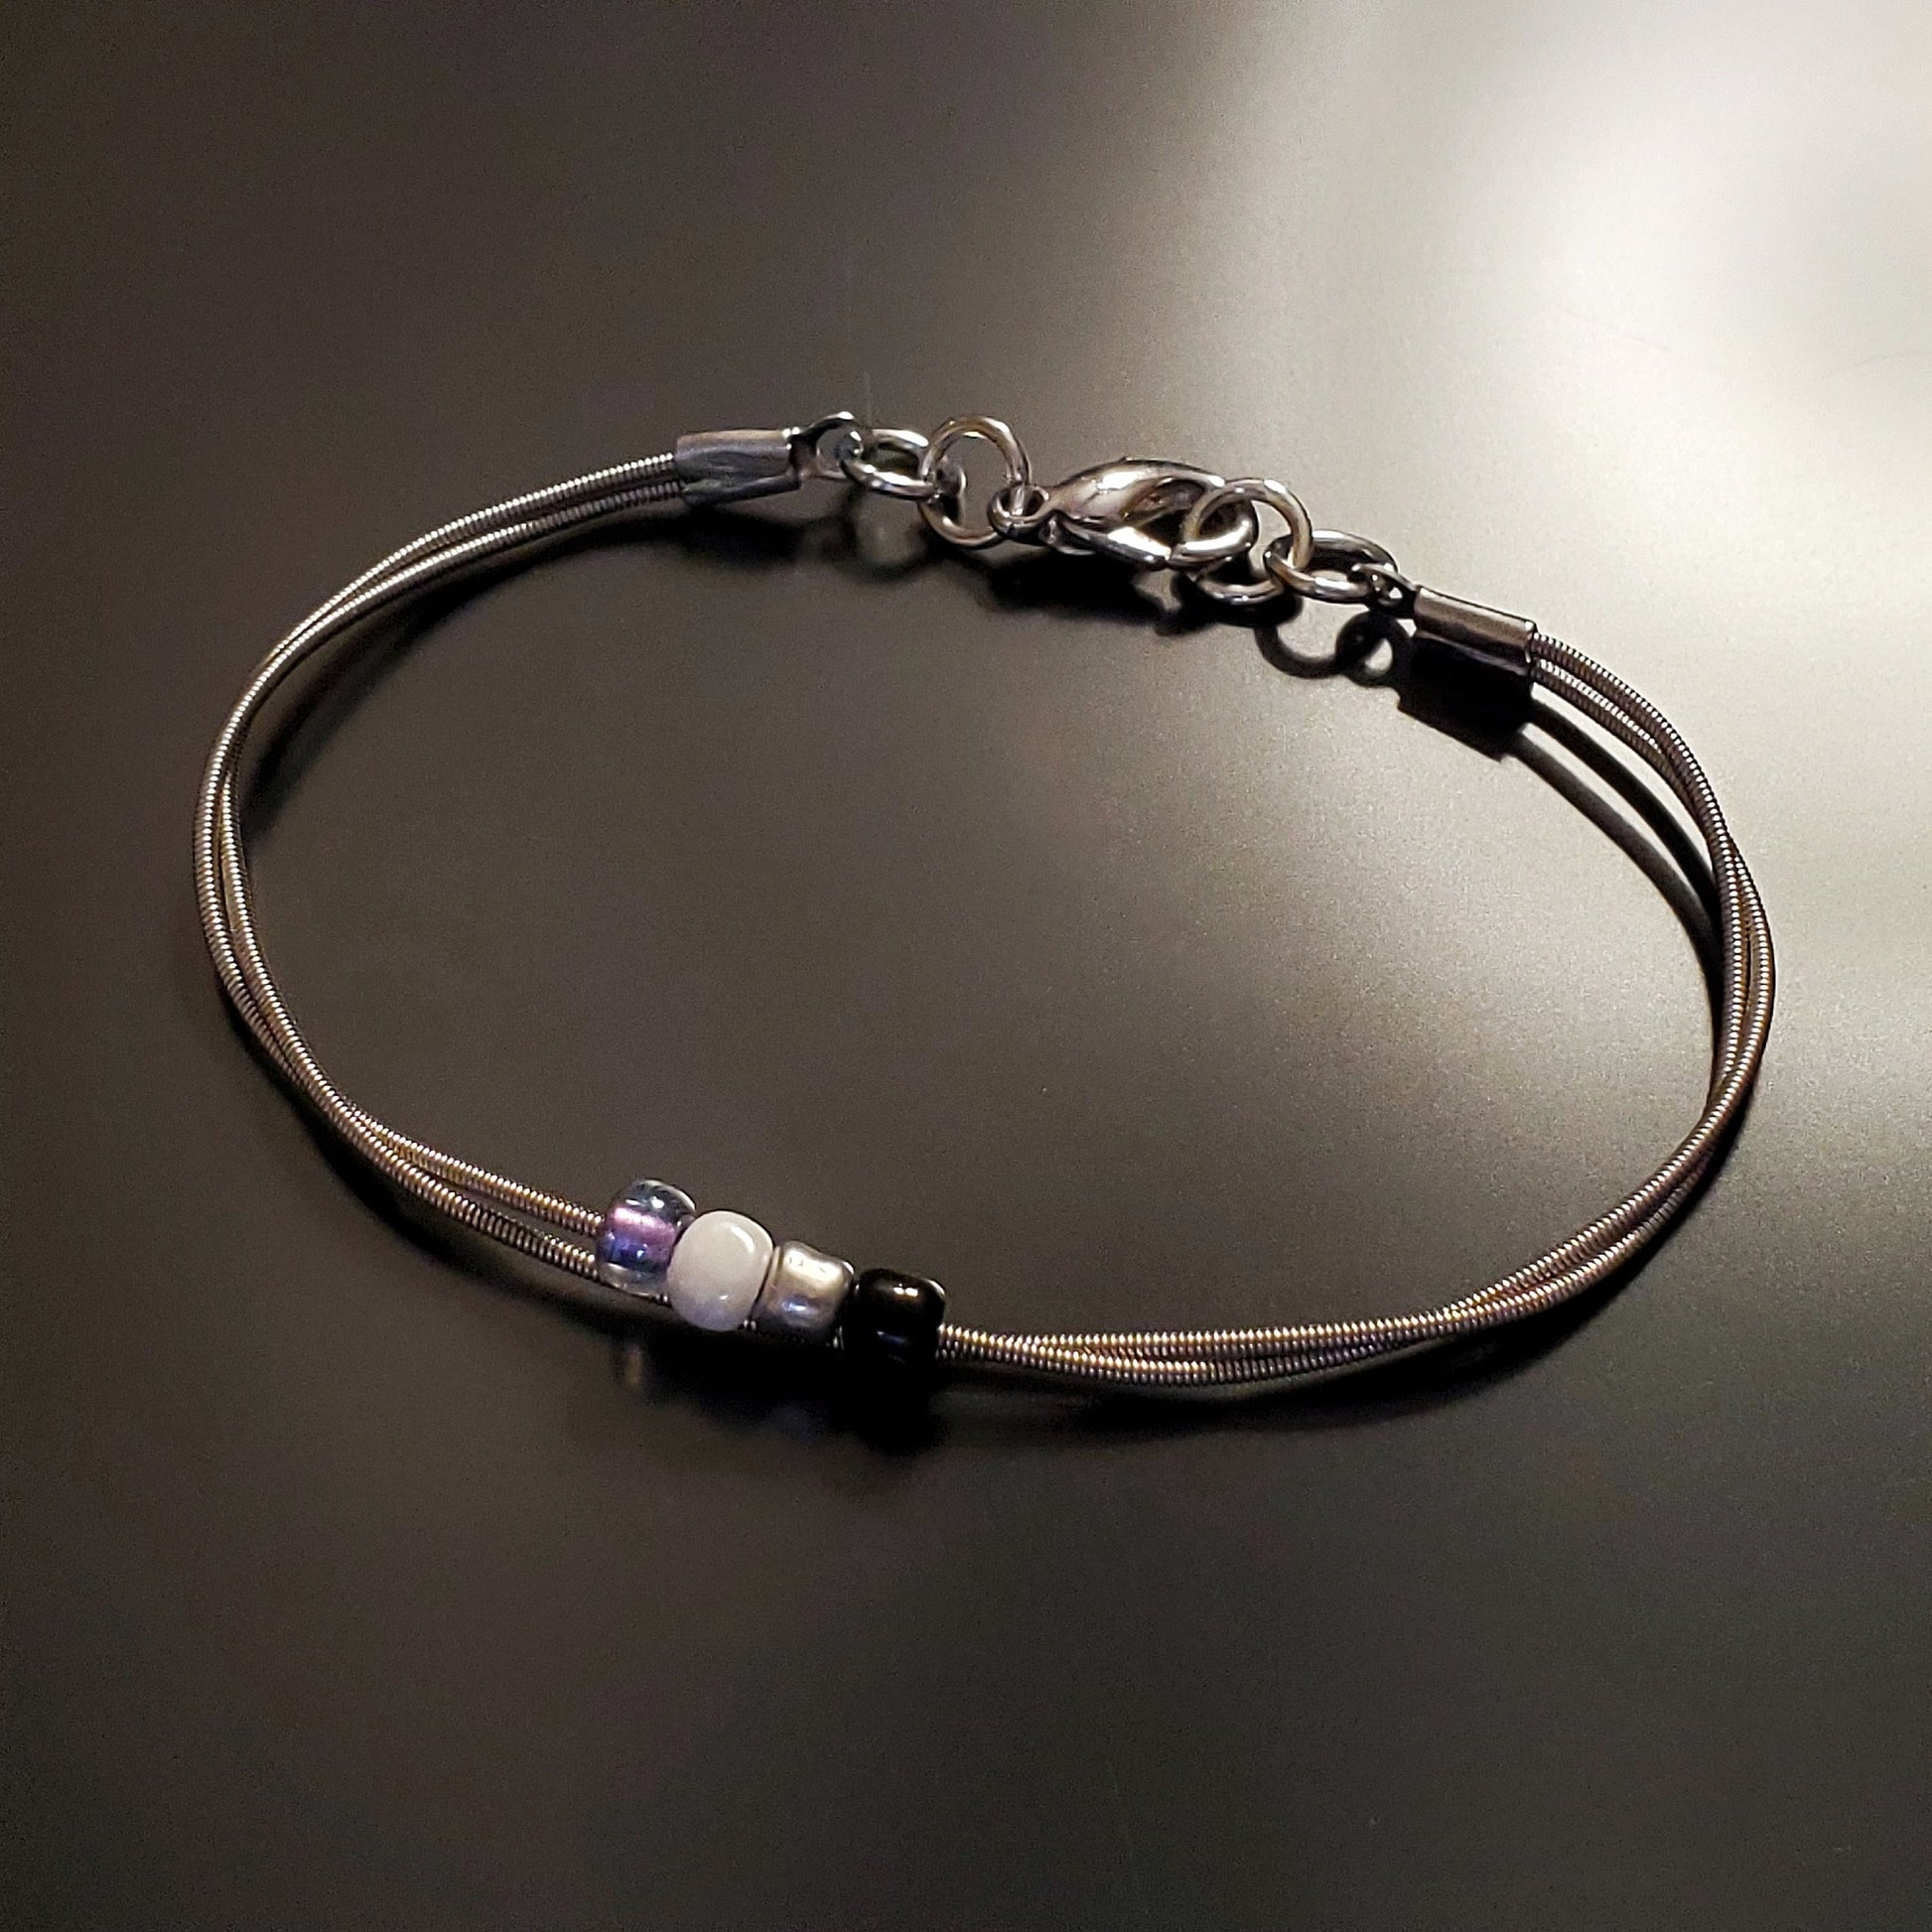 silver coloures clasp style bracelet with 4 glass beads representing the asexual pride flag (black, grey, white & purple) 